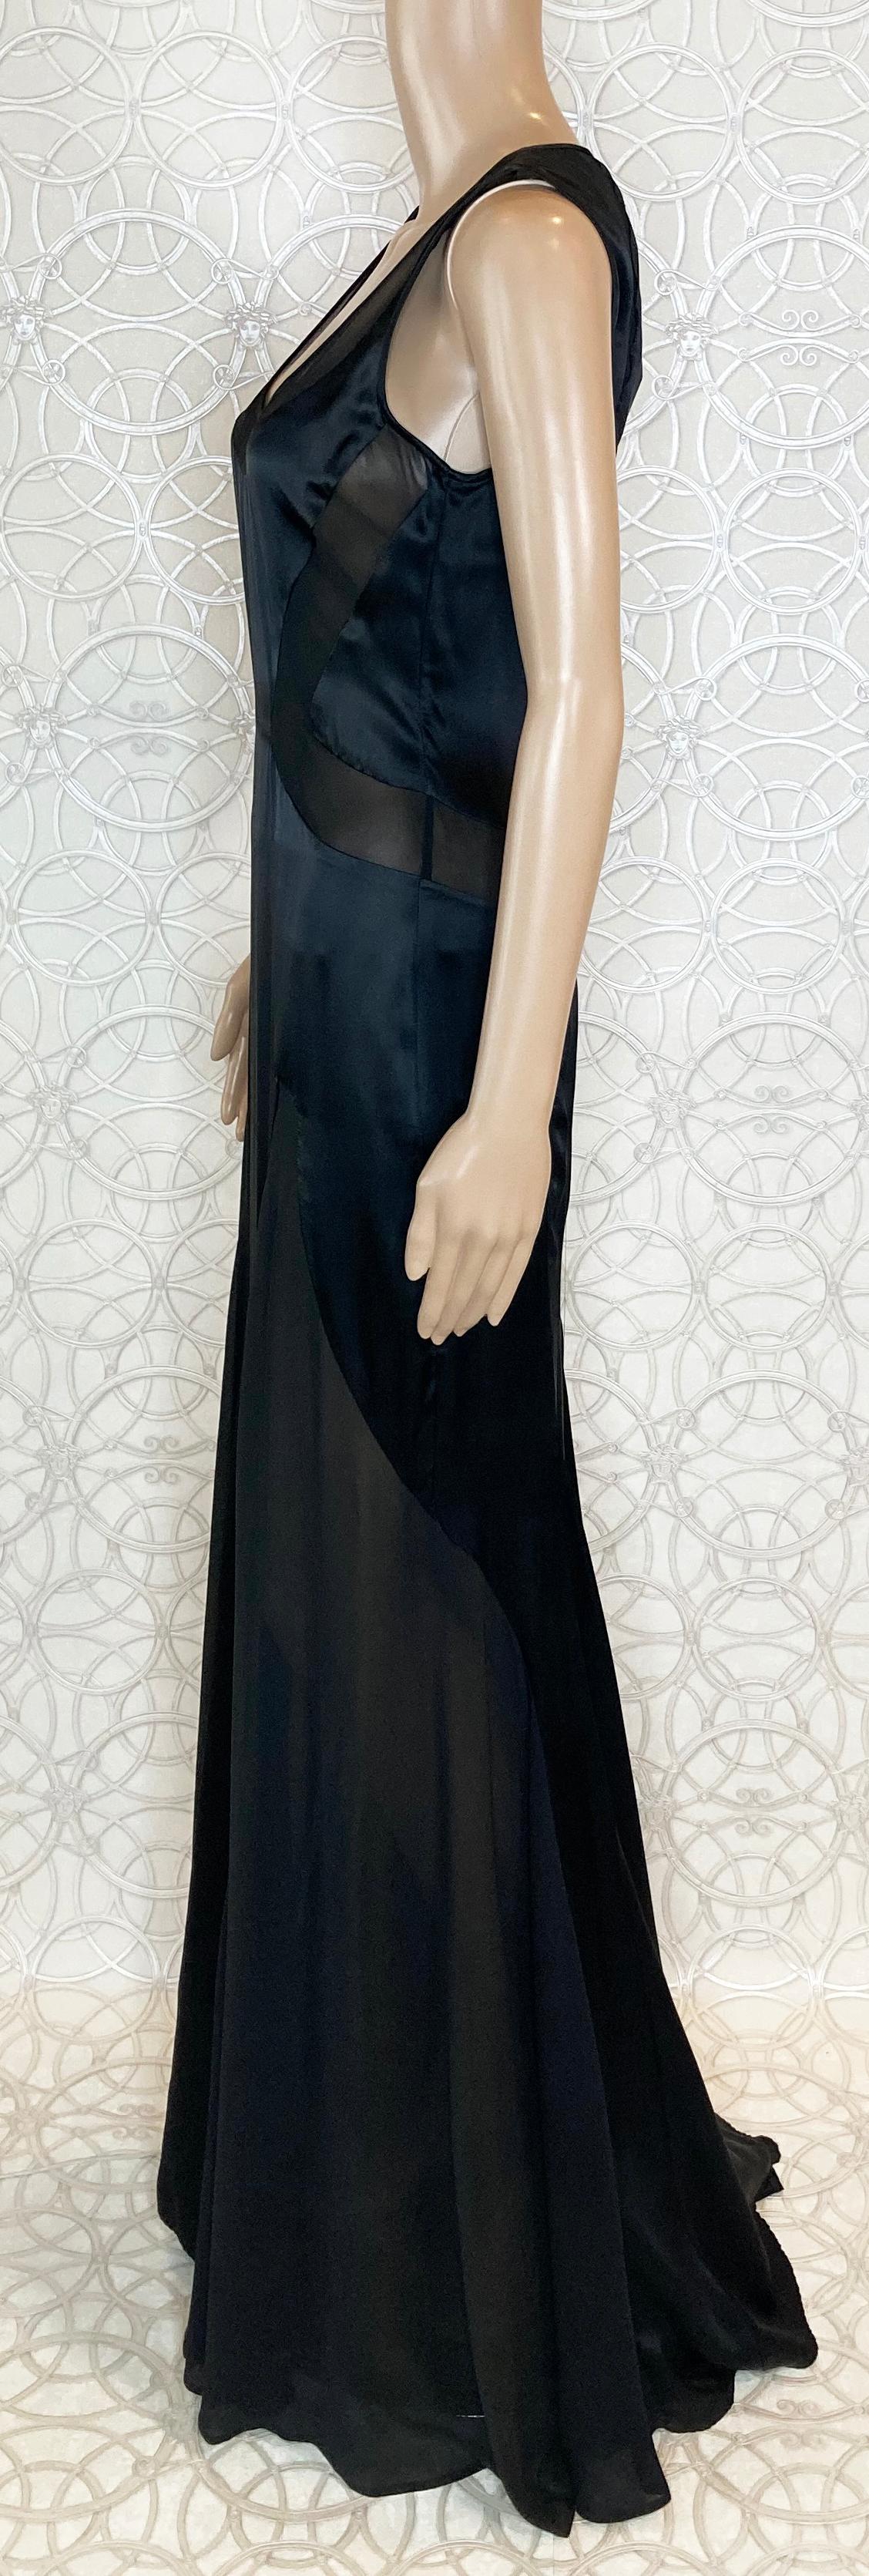 VINTAGE VERSACE BLACK SILK GOWN w/ TRANSPARENT INSERTS 40 - 4 In New Condition For Sale In Montgomery, TX